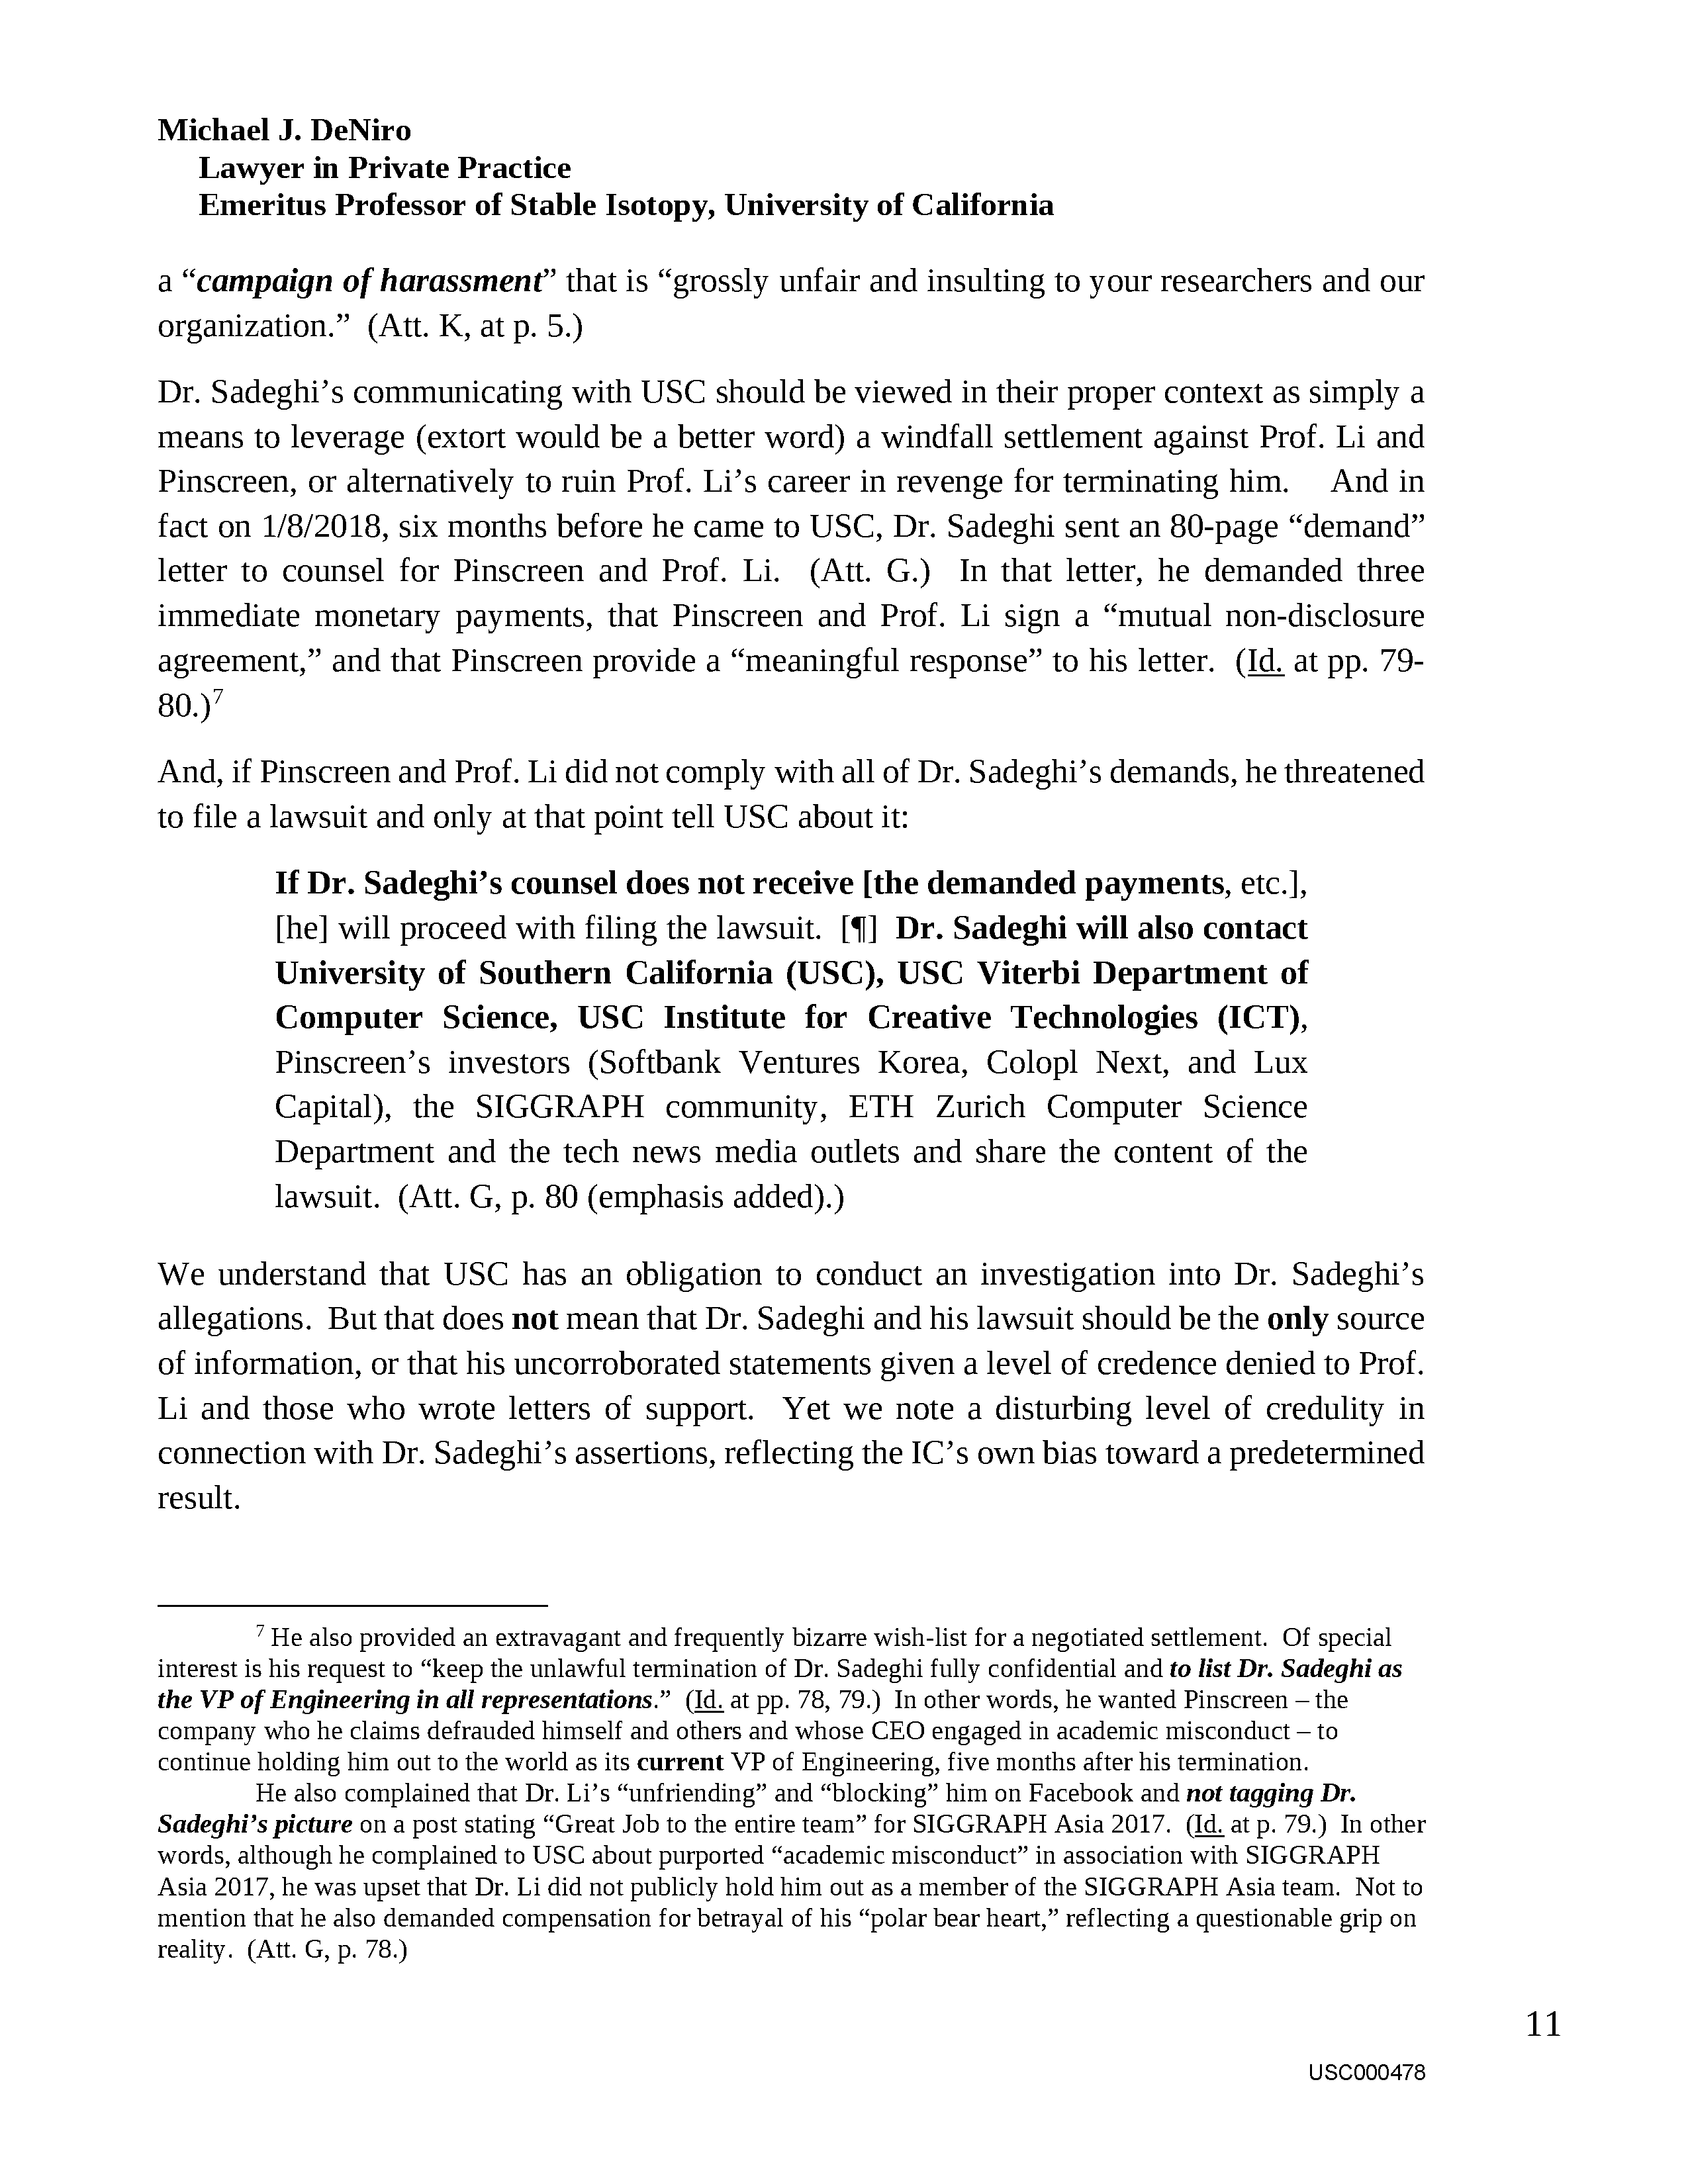 USC's Investigation Report re Hao Li's and Pinscreen's Scientific Misconduct at ACM SIGGRAPH RTL 2017 - Full Report Page 480